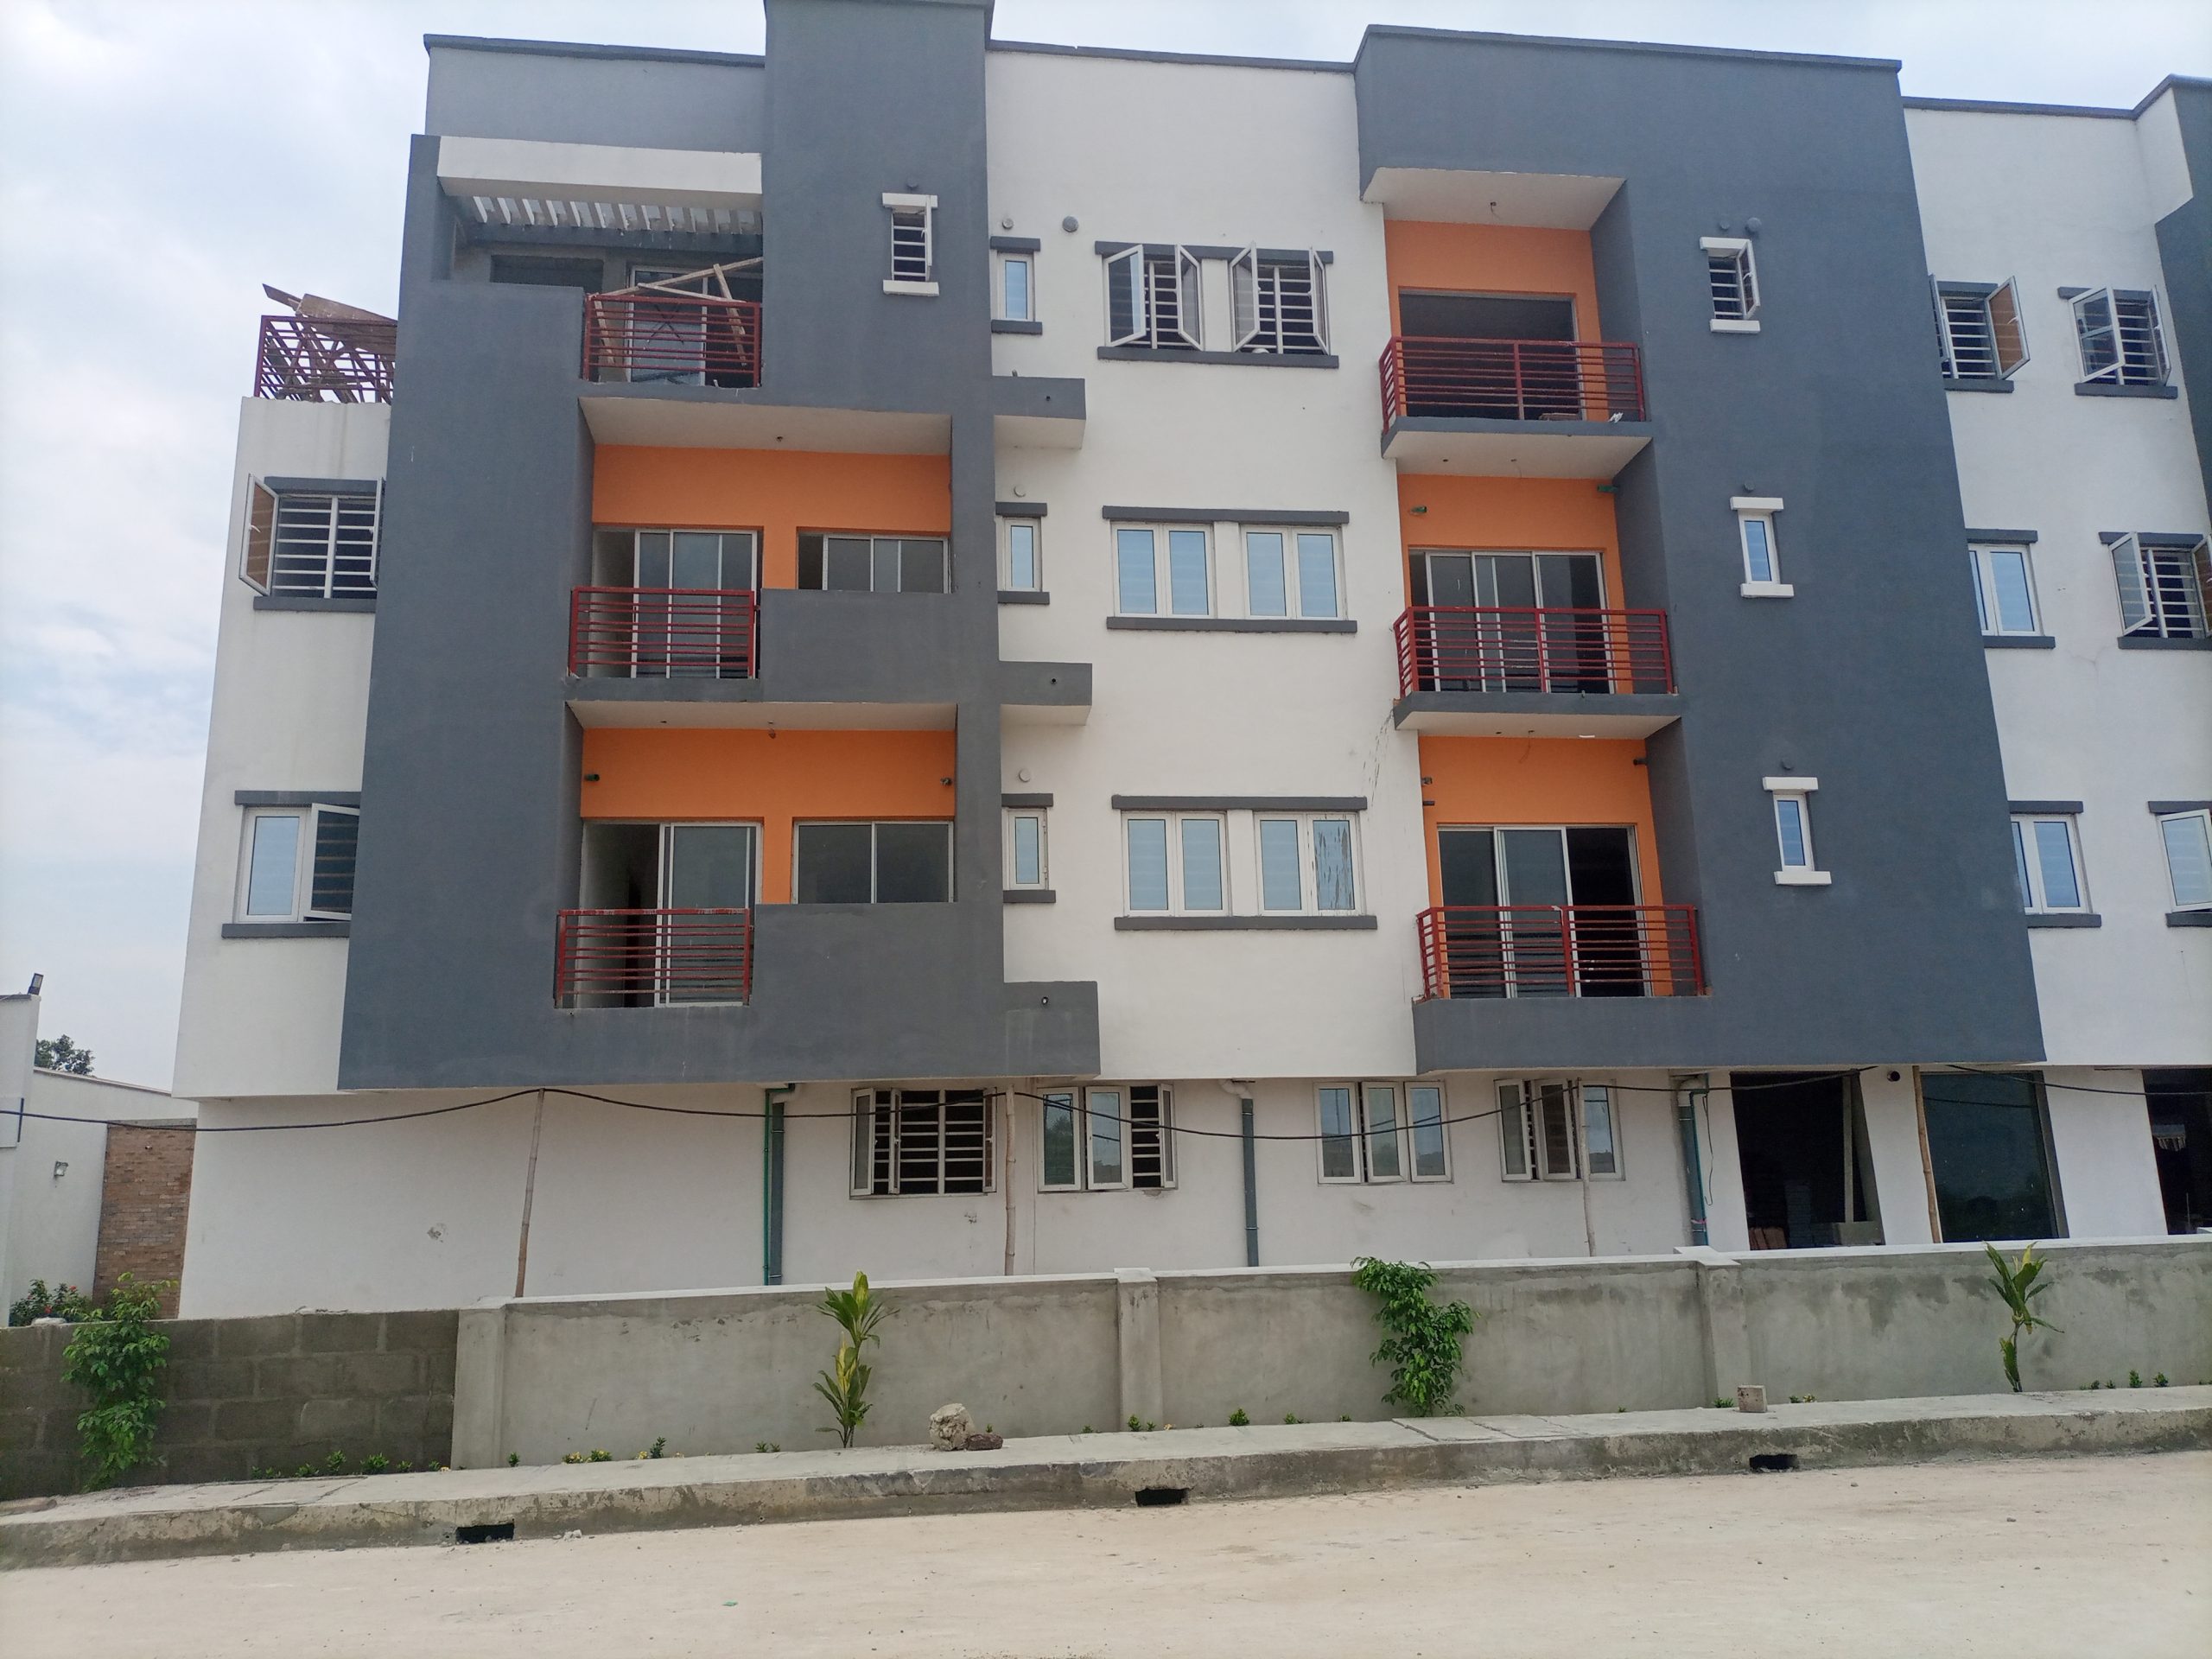 2 & 3 Bedroom Apartment for sale in Abijo, 12 months installment payment with no interest